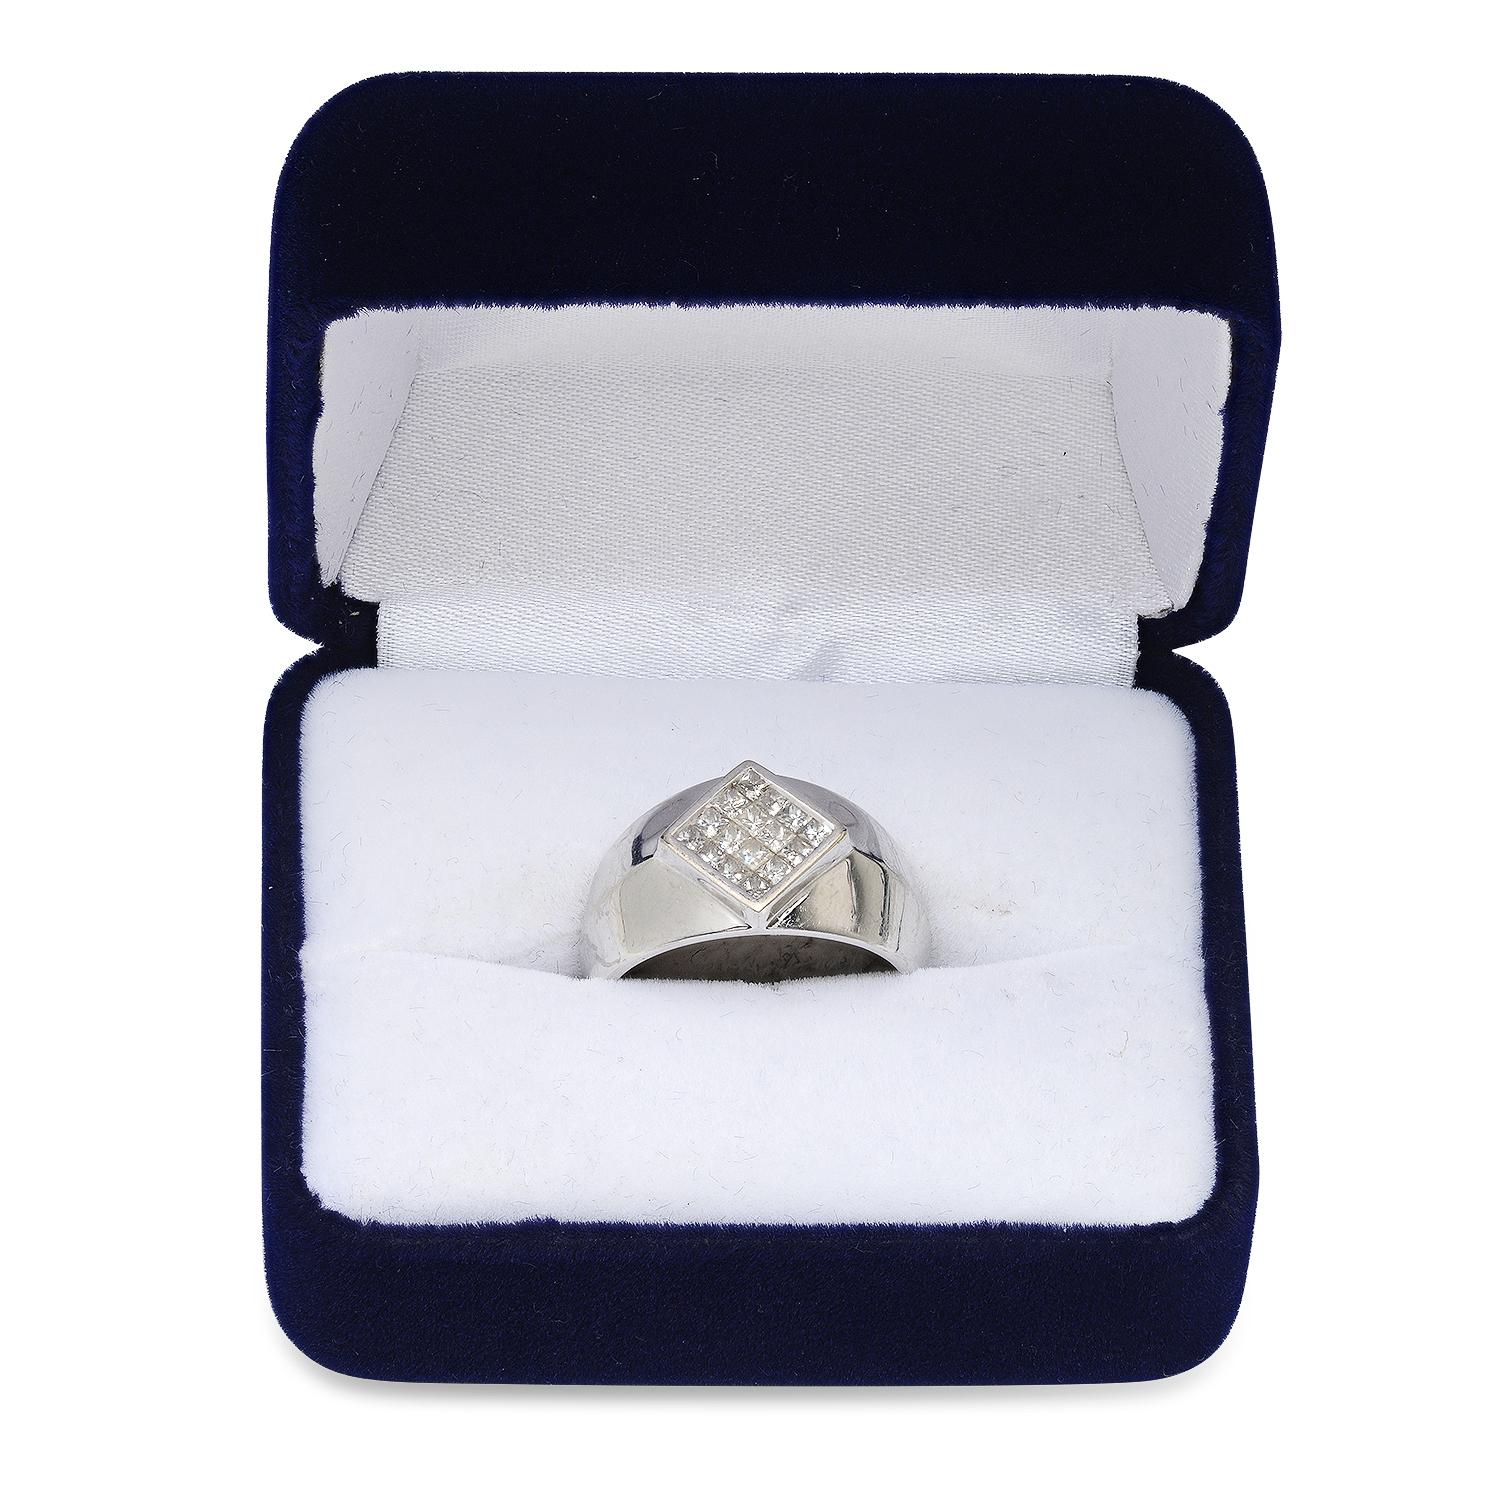 14K White Gold Setting with 0.56ct Diamond Mens Ring